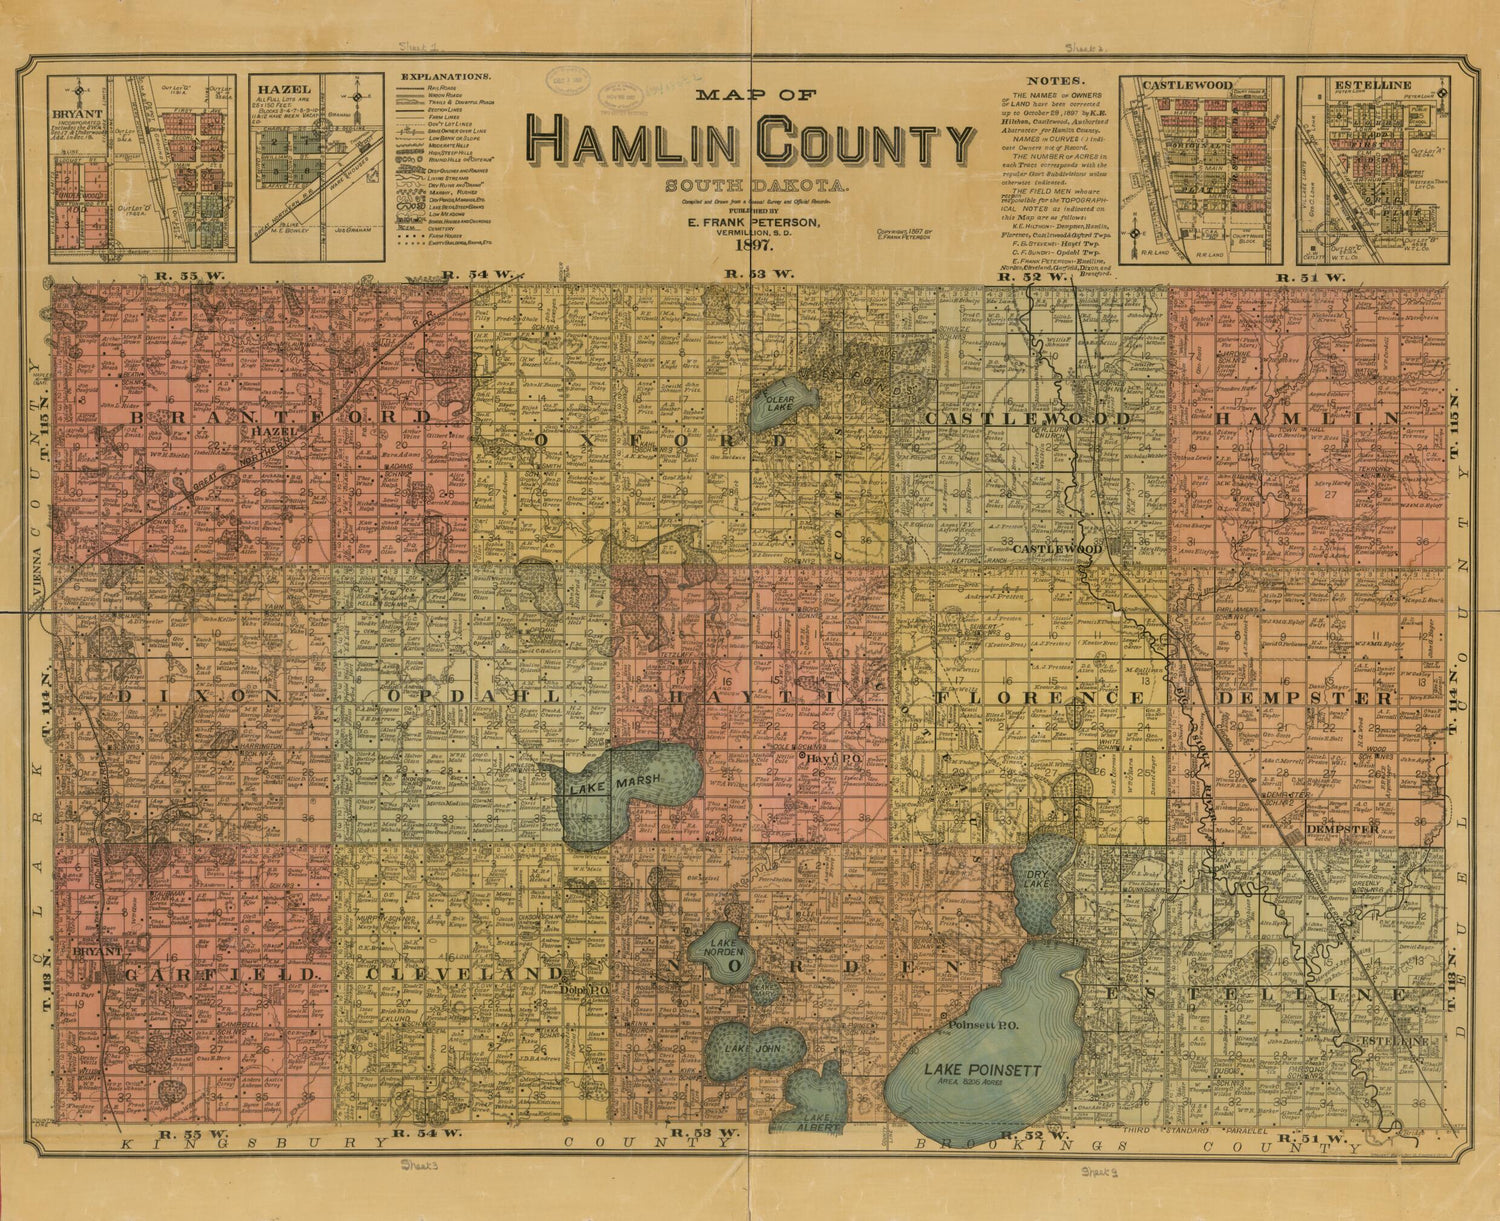 This old map of Map of Hamlin County, South Dakota : Compiled and Drawn from a Special Survey and Official Records from 1897 was created by E. Frank Peterson in 1897